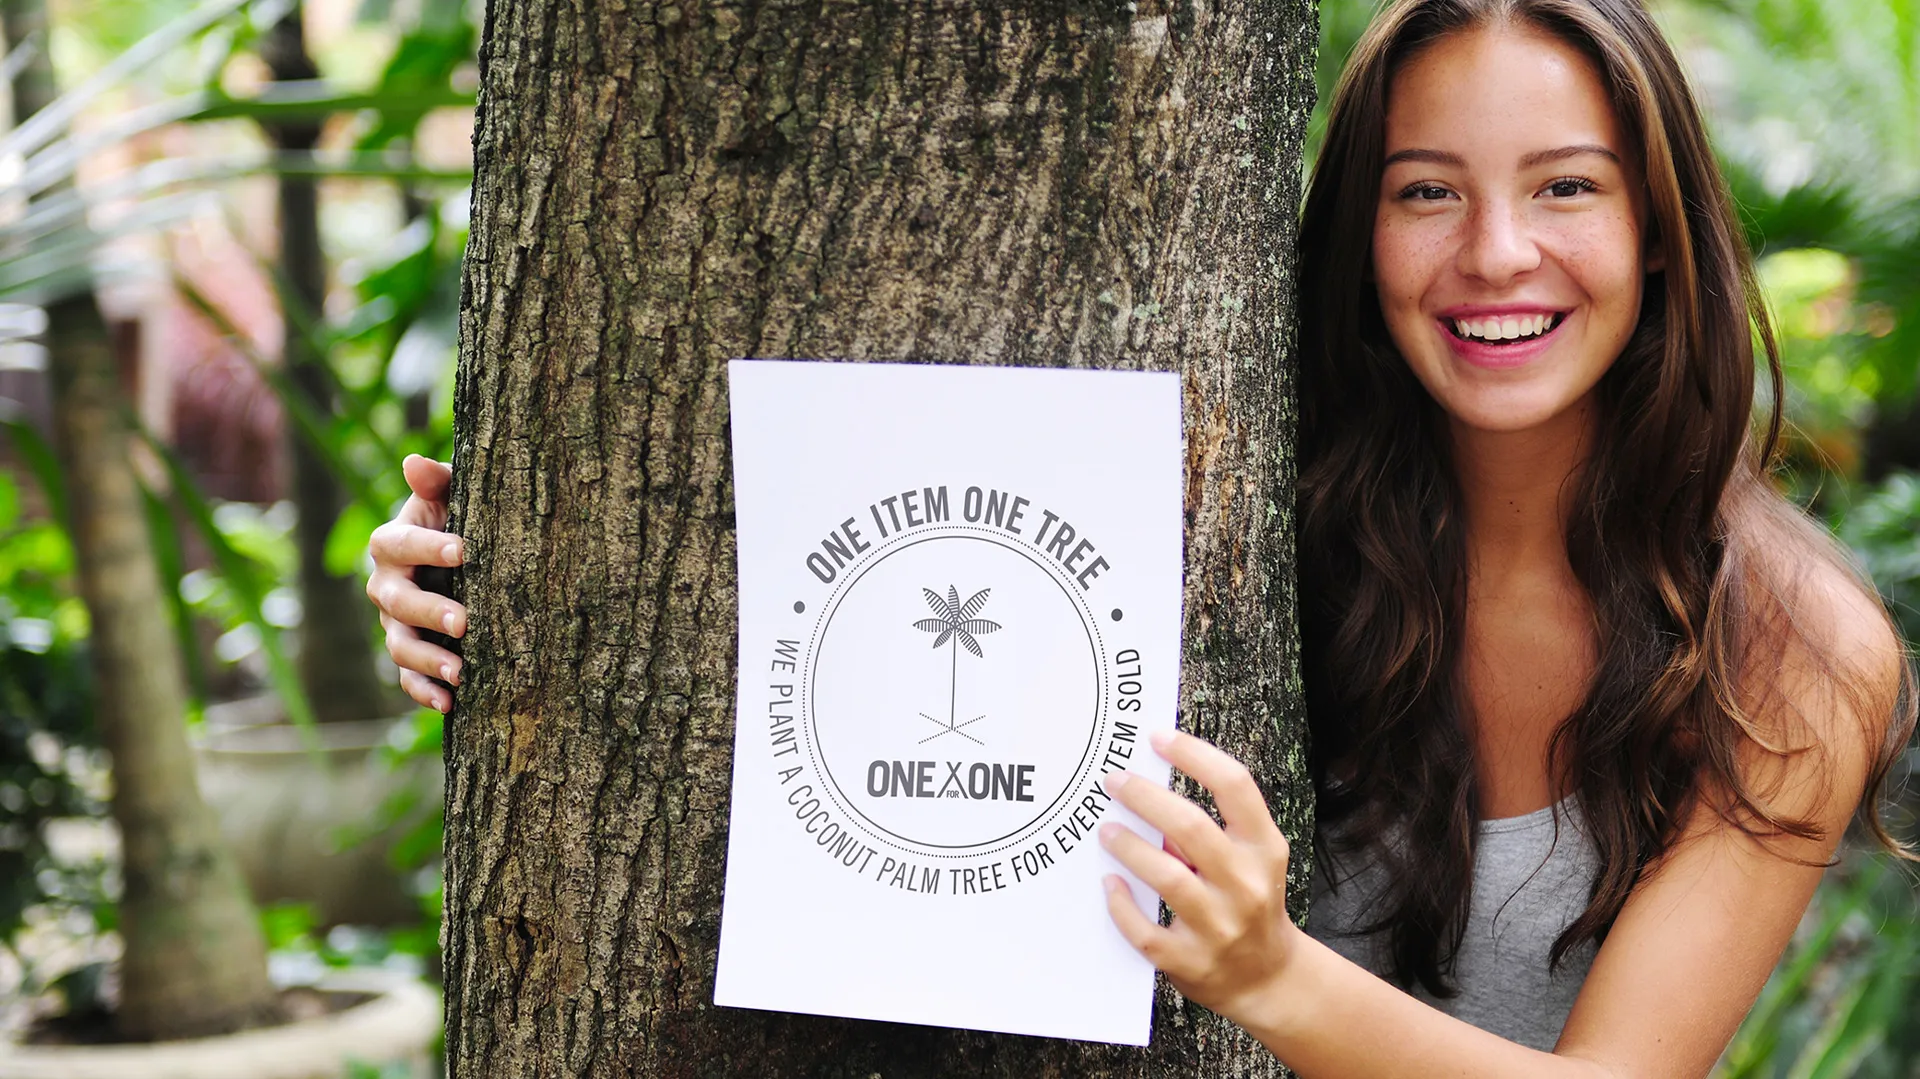 A smiling person with long brown hair stands next to a tree, holding a white sign that reads "One Item One Tree. We plant a coconut palm tree for every item sold." The background features lush greenery.